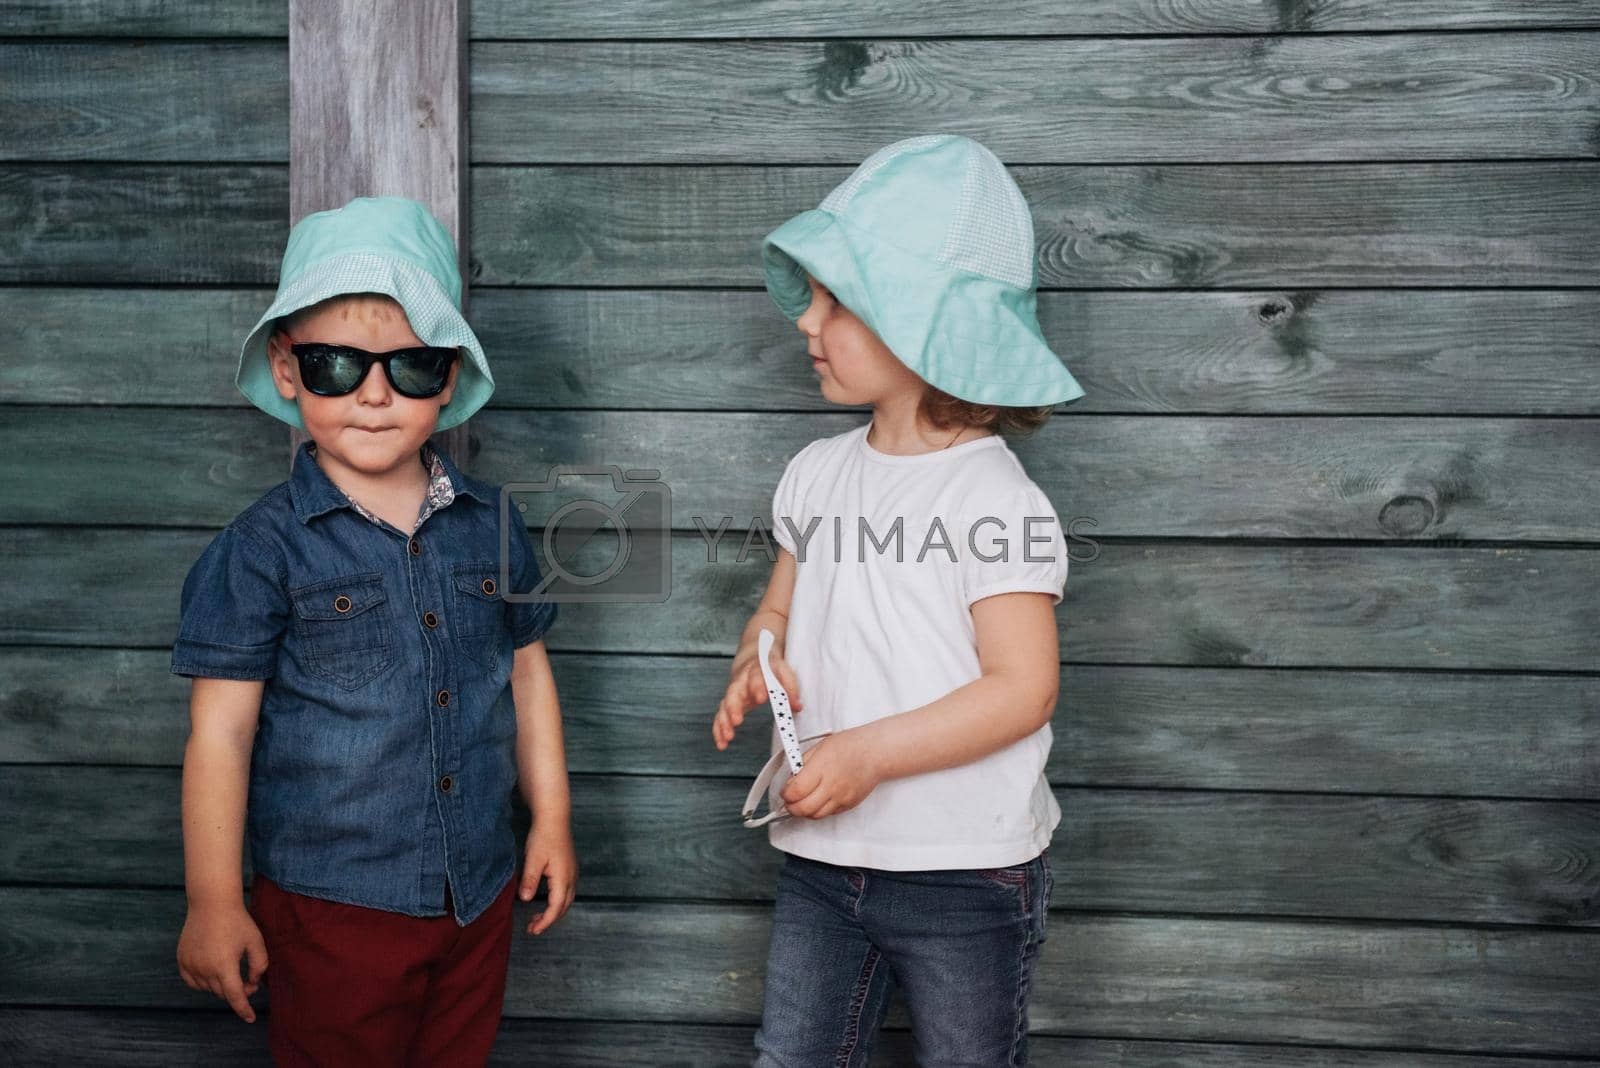 Royalty free image of Happy young children siblings Ukraine. Europe by Standret